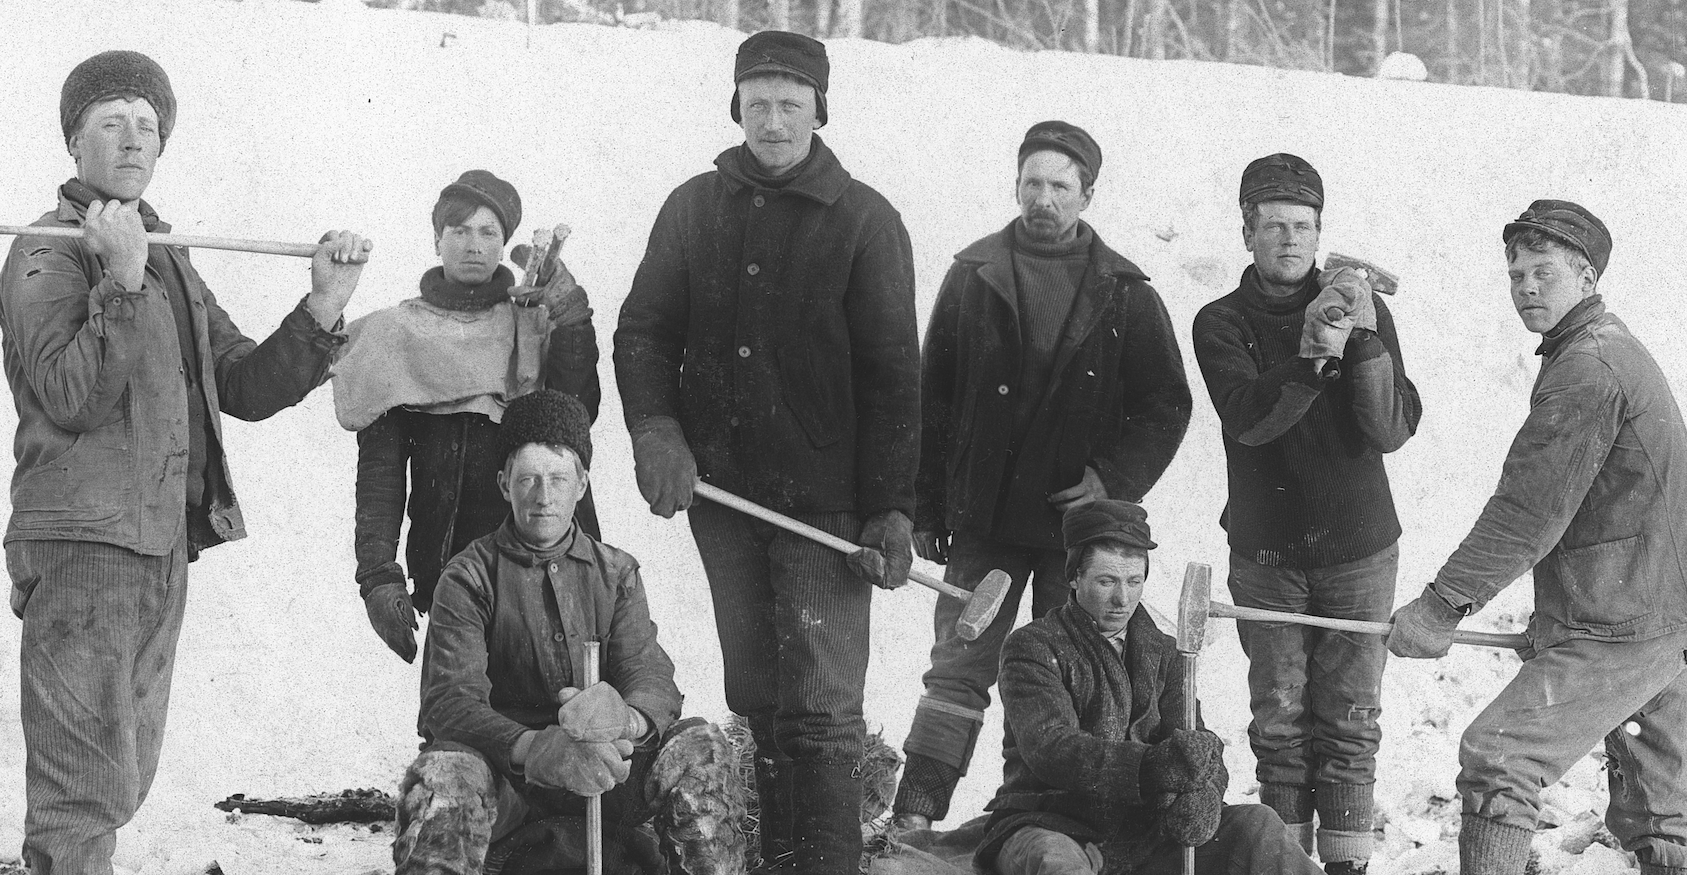 Young Ukrainian men on a drilling gang pose during the building of the Transcontinental Railway in northwestern Ontario in 1908. Photographer: C.G. Linde